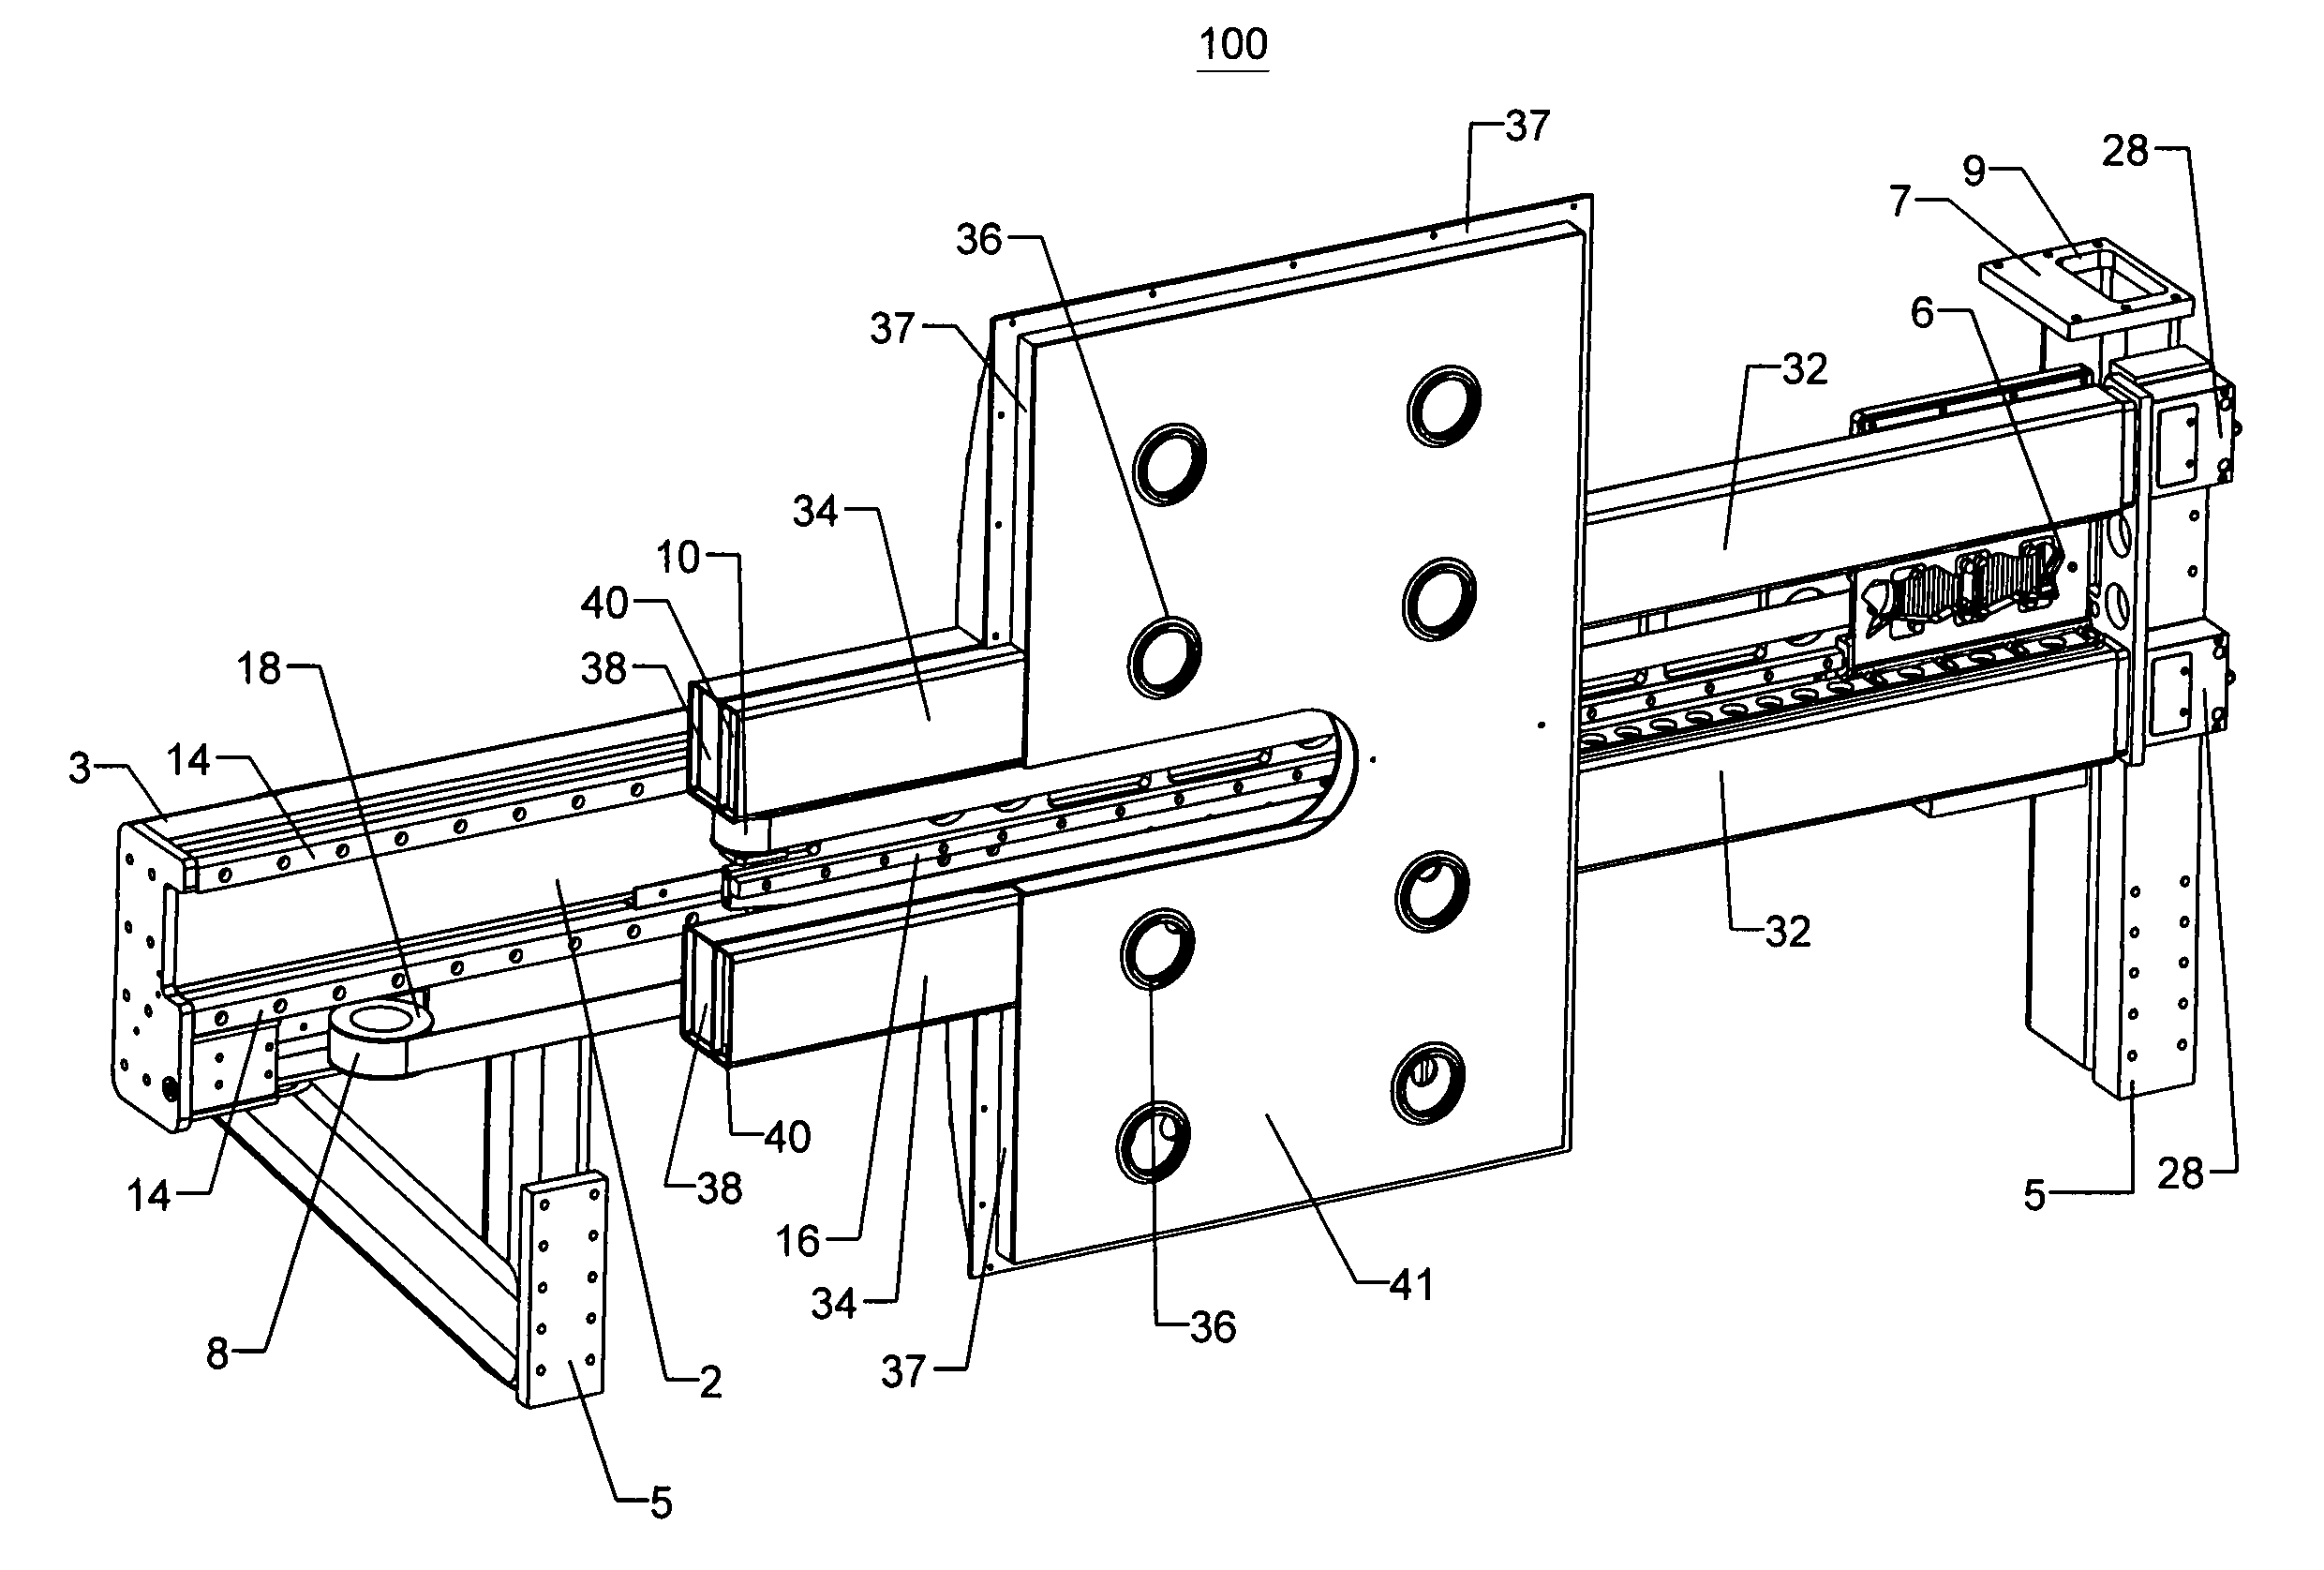 Telescoping article retrieval system with plenum assembly attached to slave belt